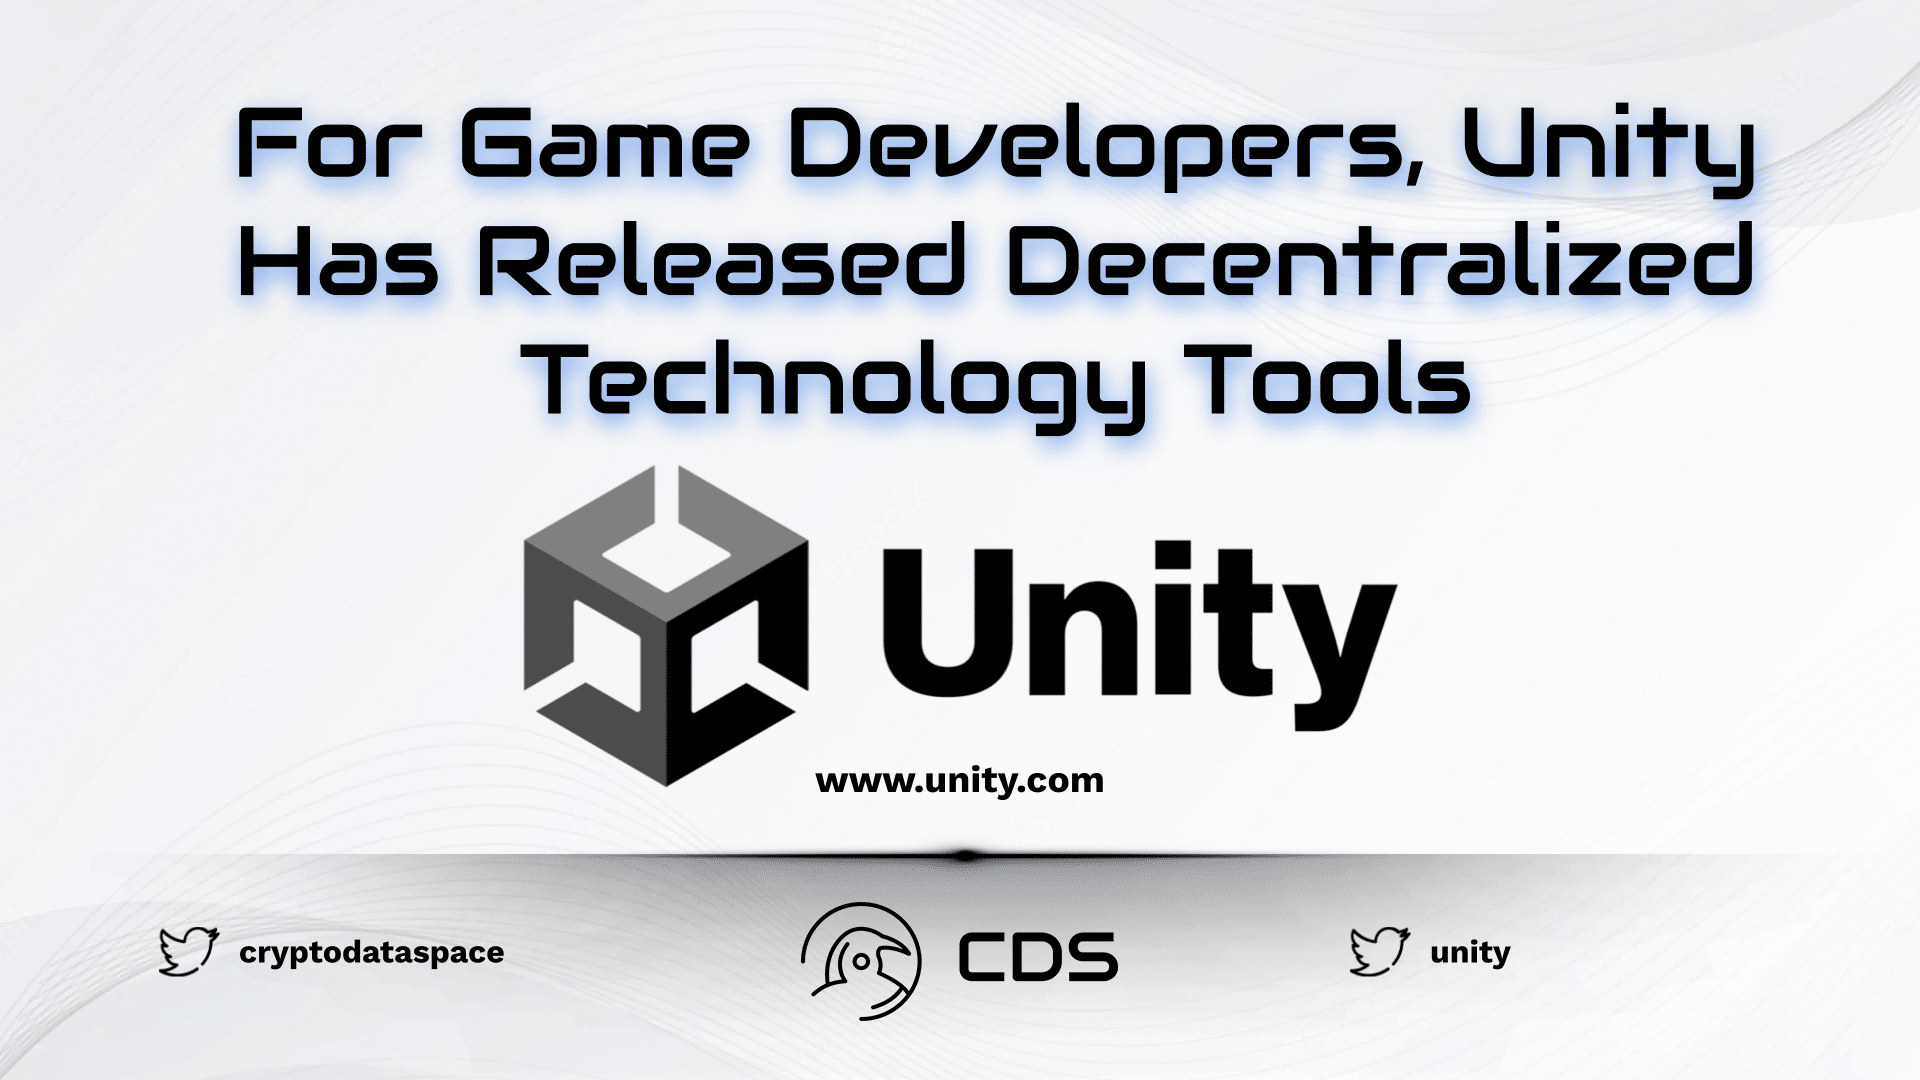 For Game Developers, Unity Has Released Decentralized Technology Tools